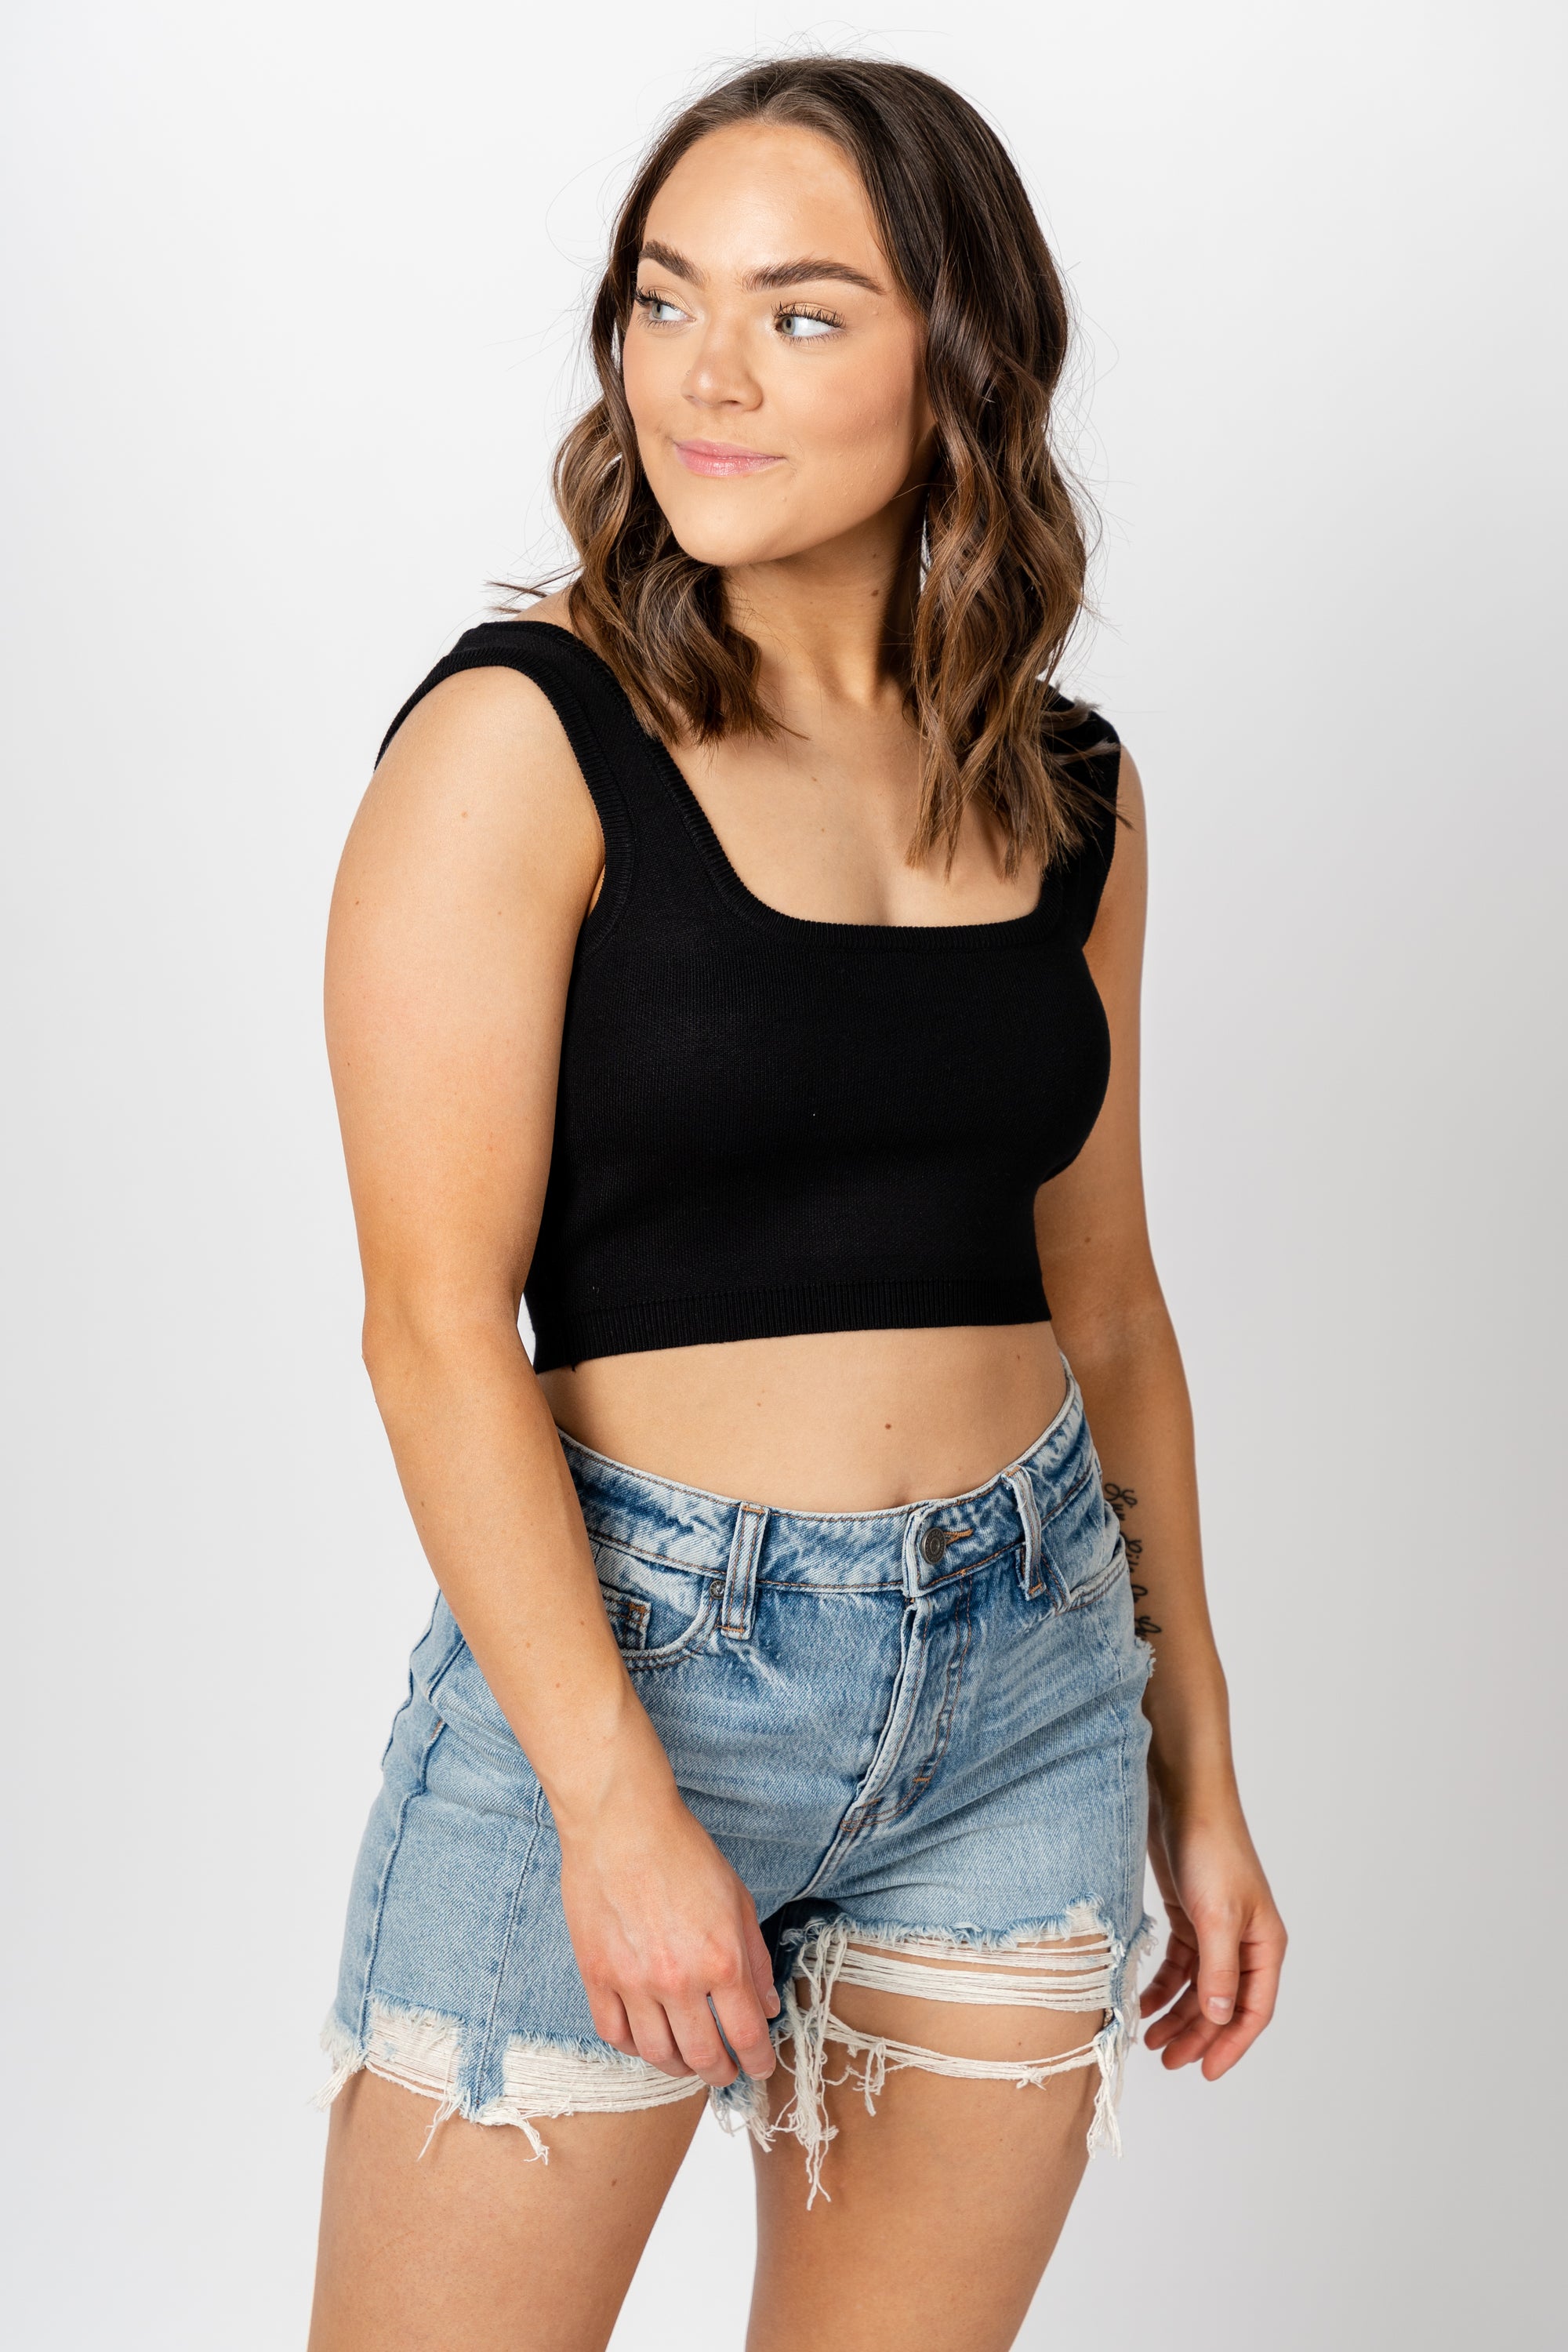 Sleeveless knit crop tank top black - Cute Tank Top - Trendy Tank Tops at Lush Fashion Lounge Boutique in Oklahoma City